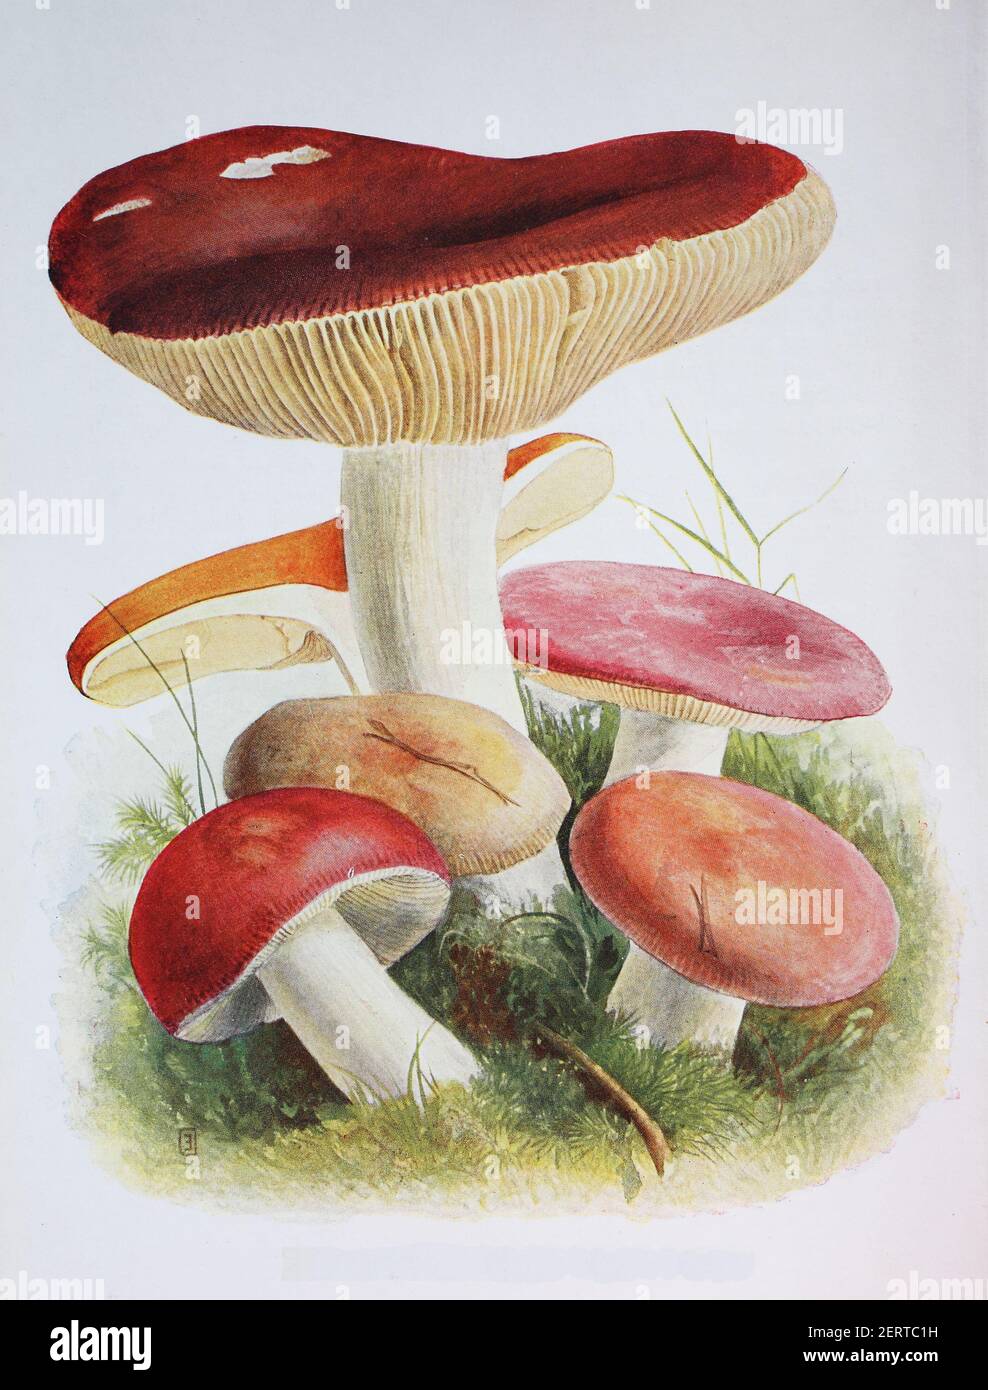 Russula albidula is a species of mushroom in the Russula genus, digital reproduction of an ilustration of Emil Doerstling (1859-1940) Stock Photo